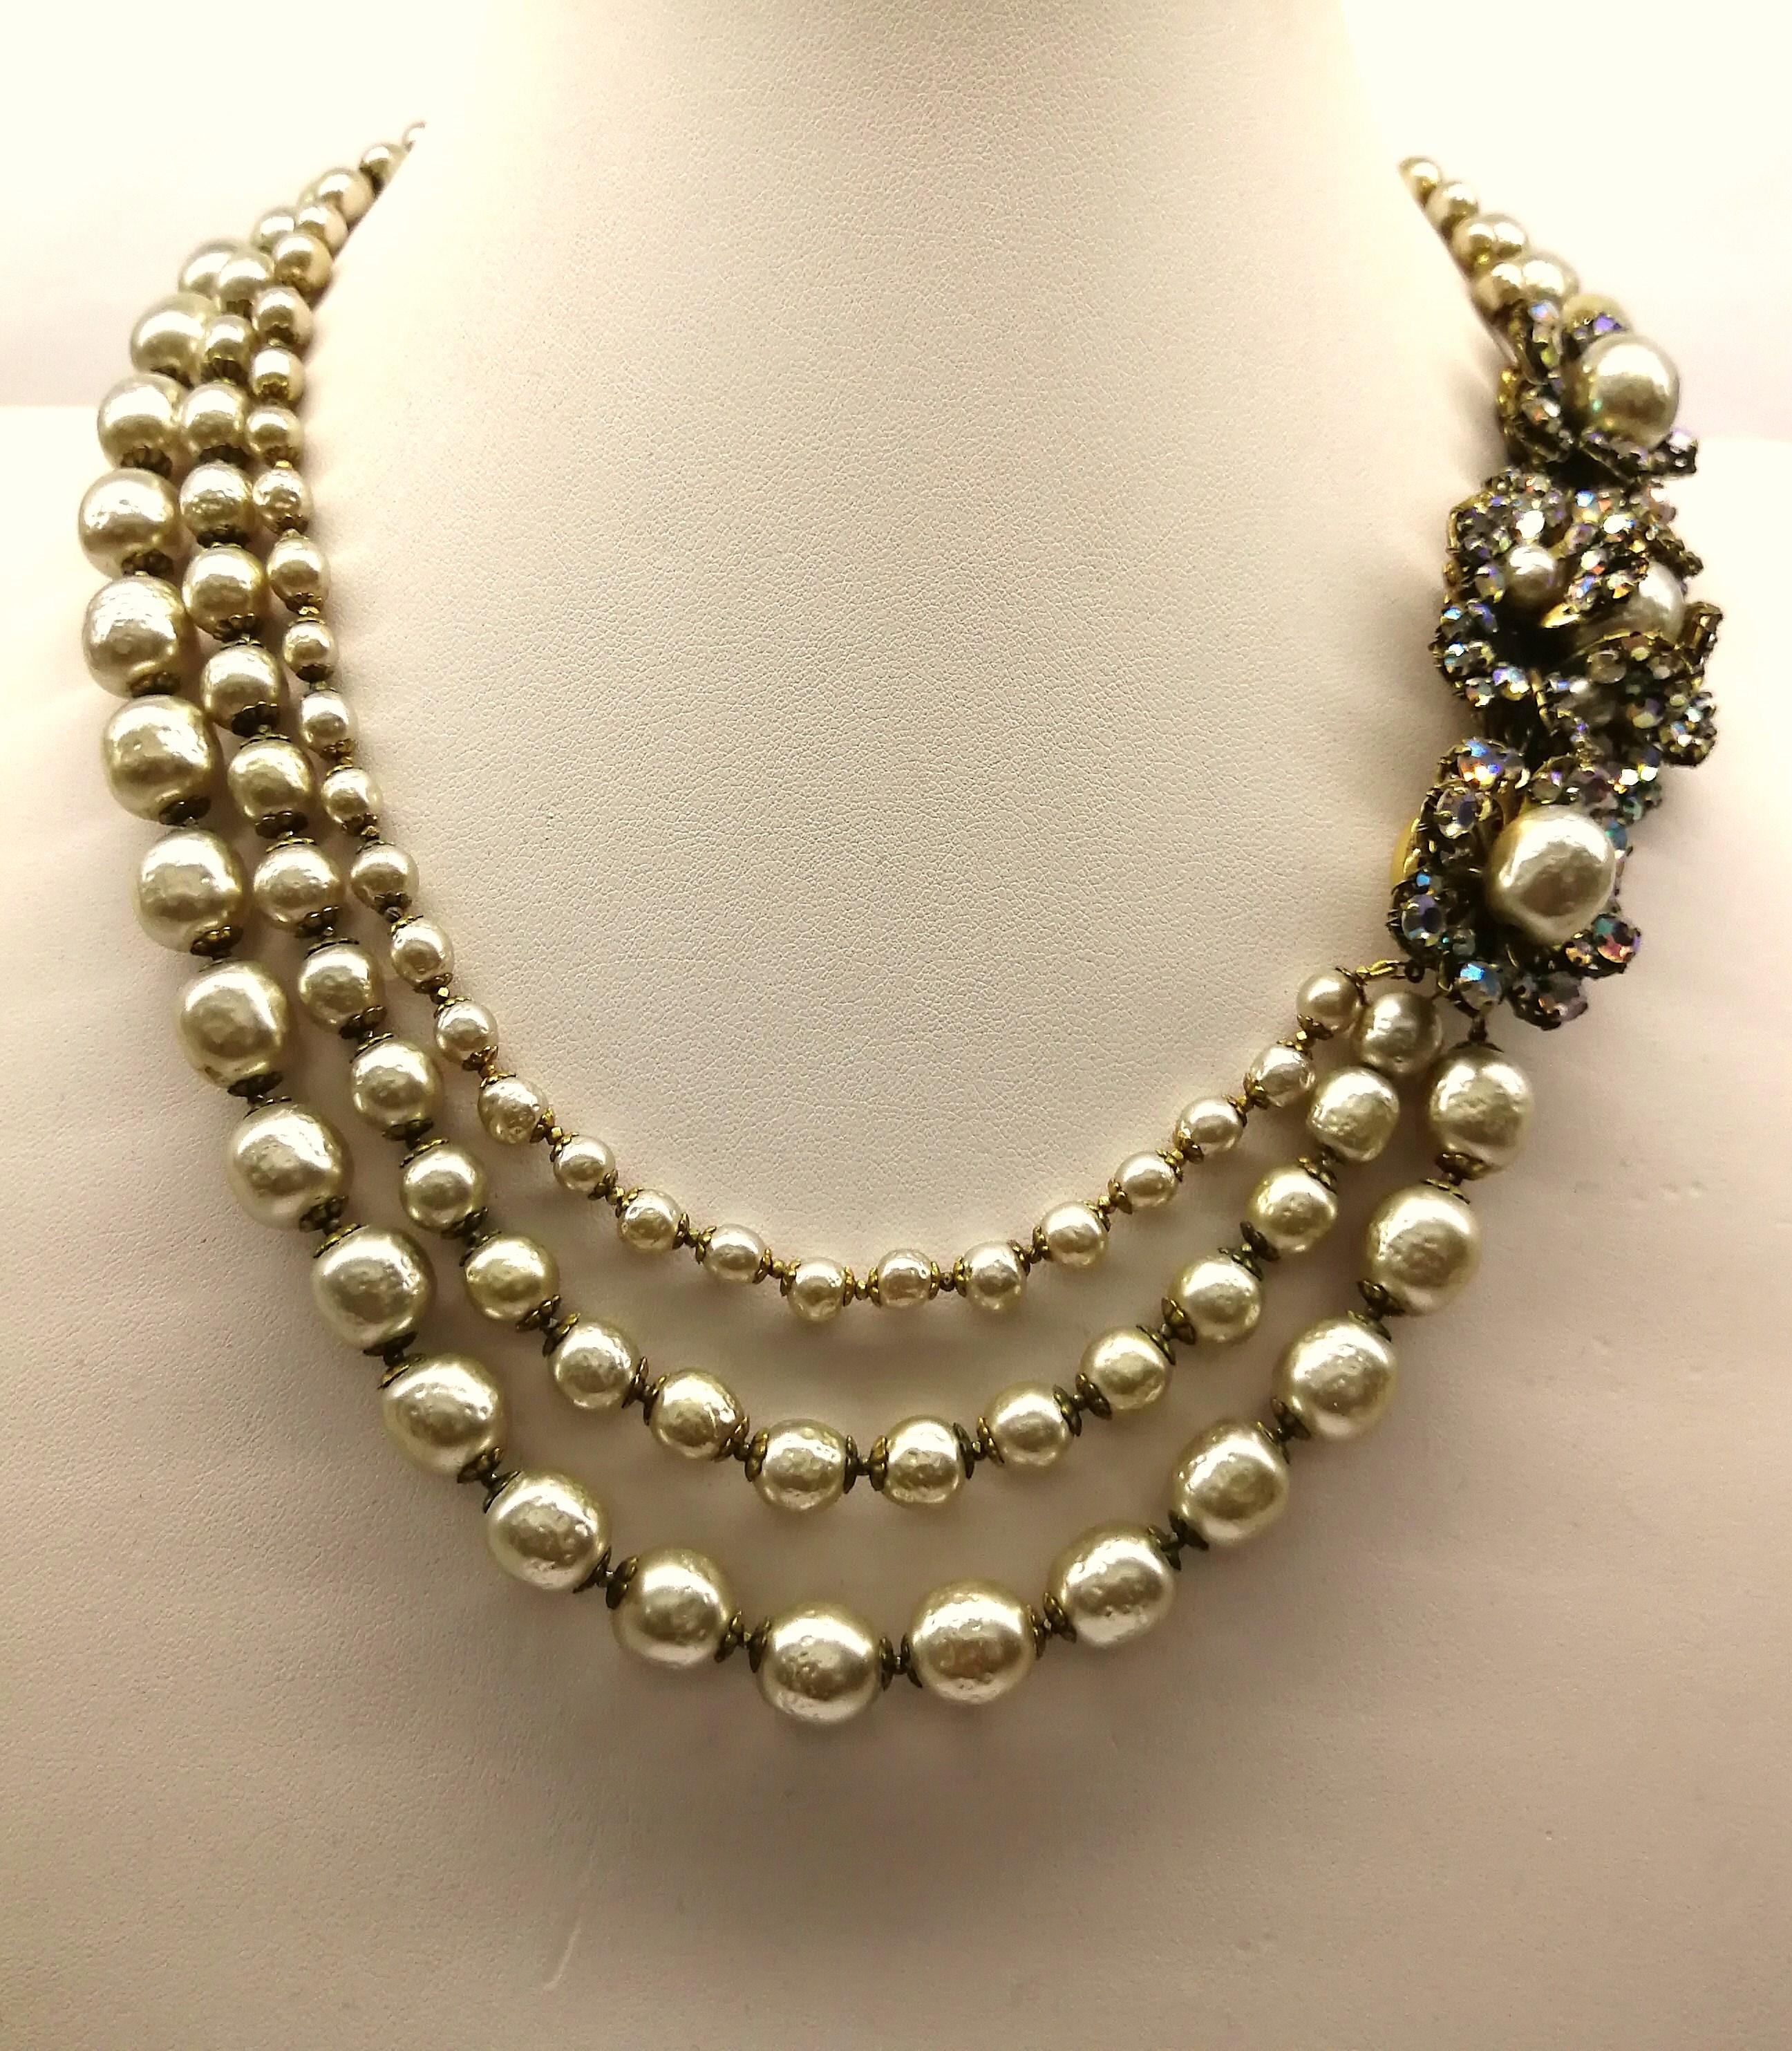 Classic pearls! 
A beautiful and very wearable necklace by Miriam Haskell.
The soft, varied mixed tones of the iridescent 'rose montes'  and the beautiful 'champagne' colour of the graduated baroque pearls, give this necklace a richness and warmth.